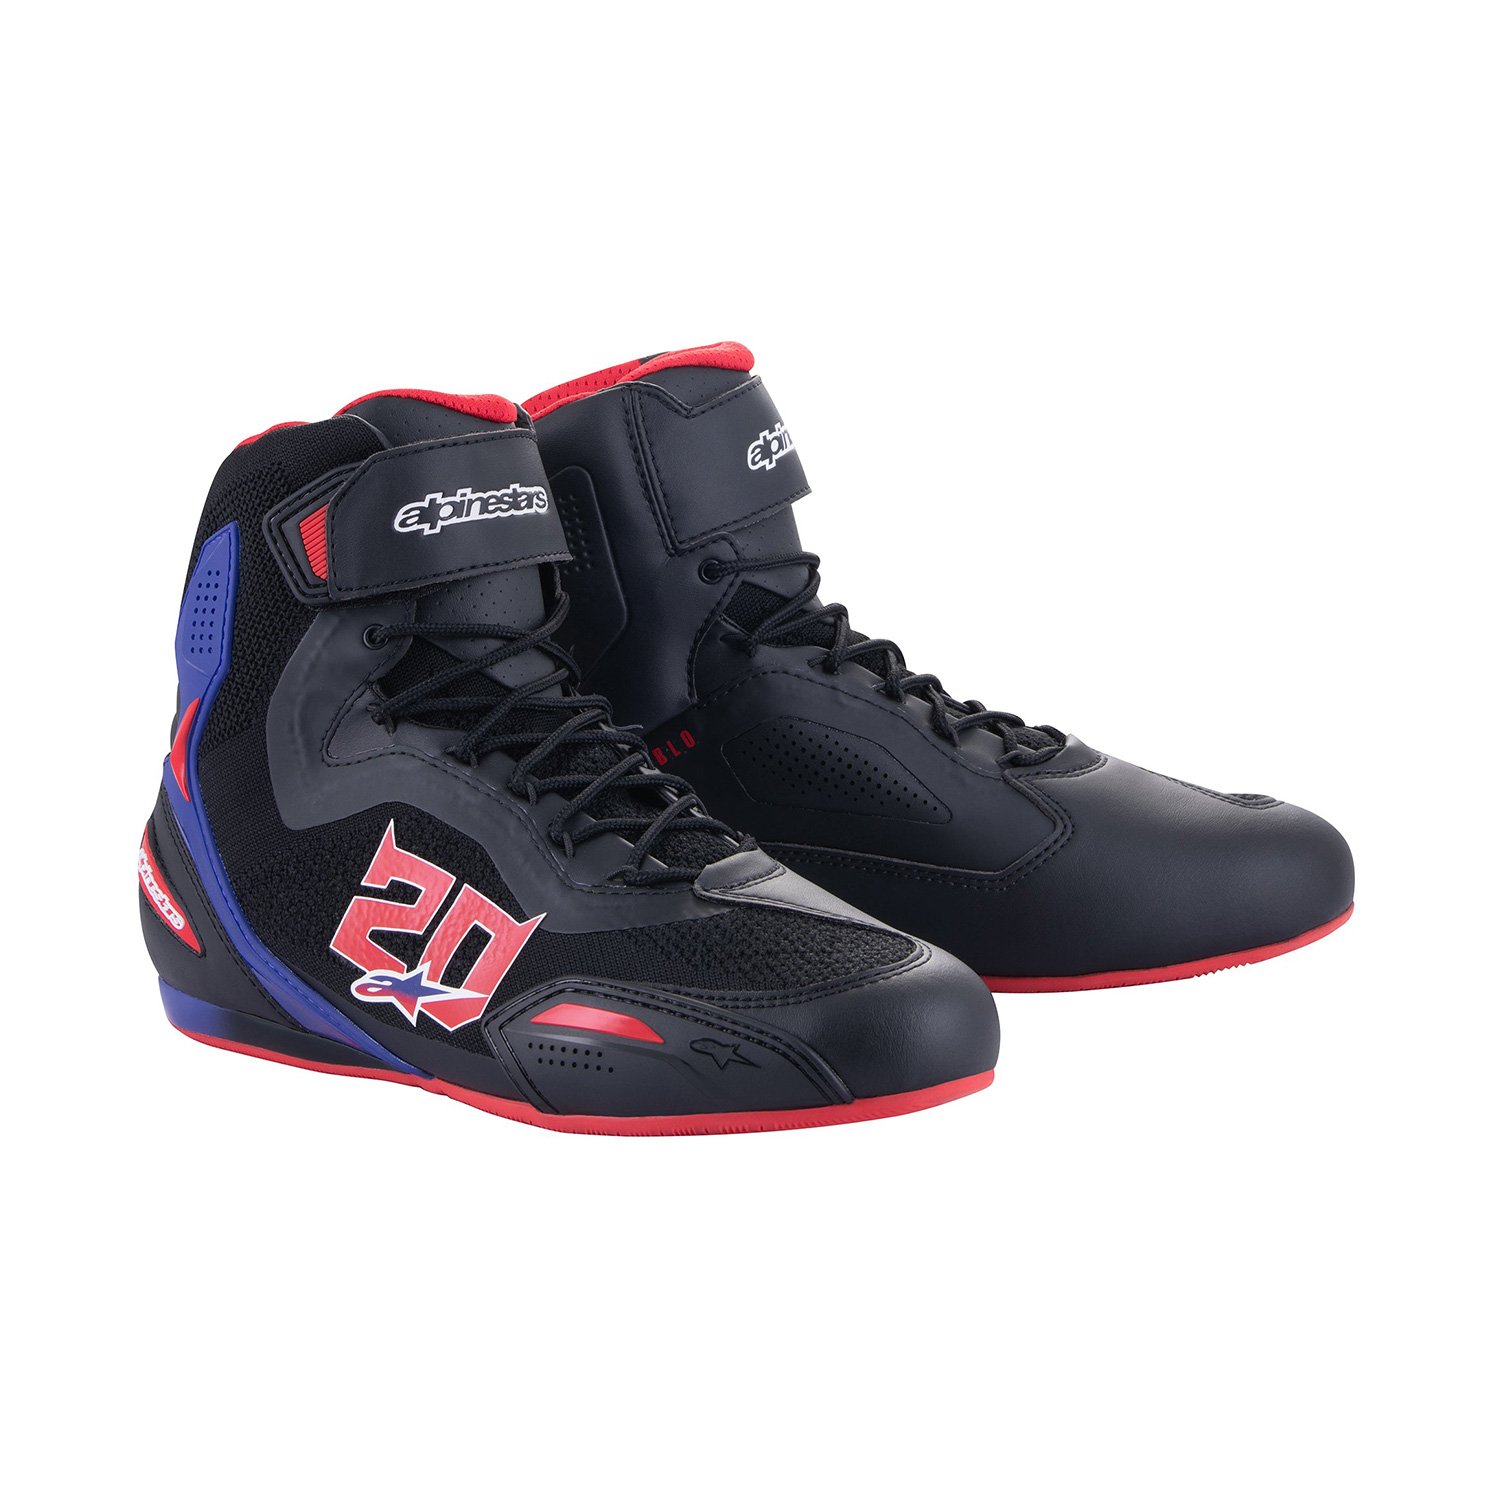 Image of Alpinestars FQ20 Faster-3 Rideknit Noir Bright Rouge Bleu Chaussures Taille US 95